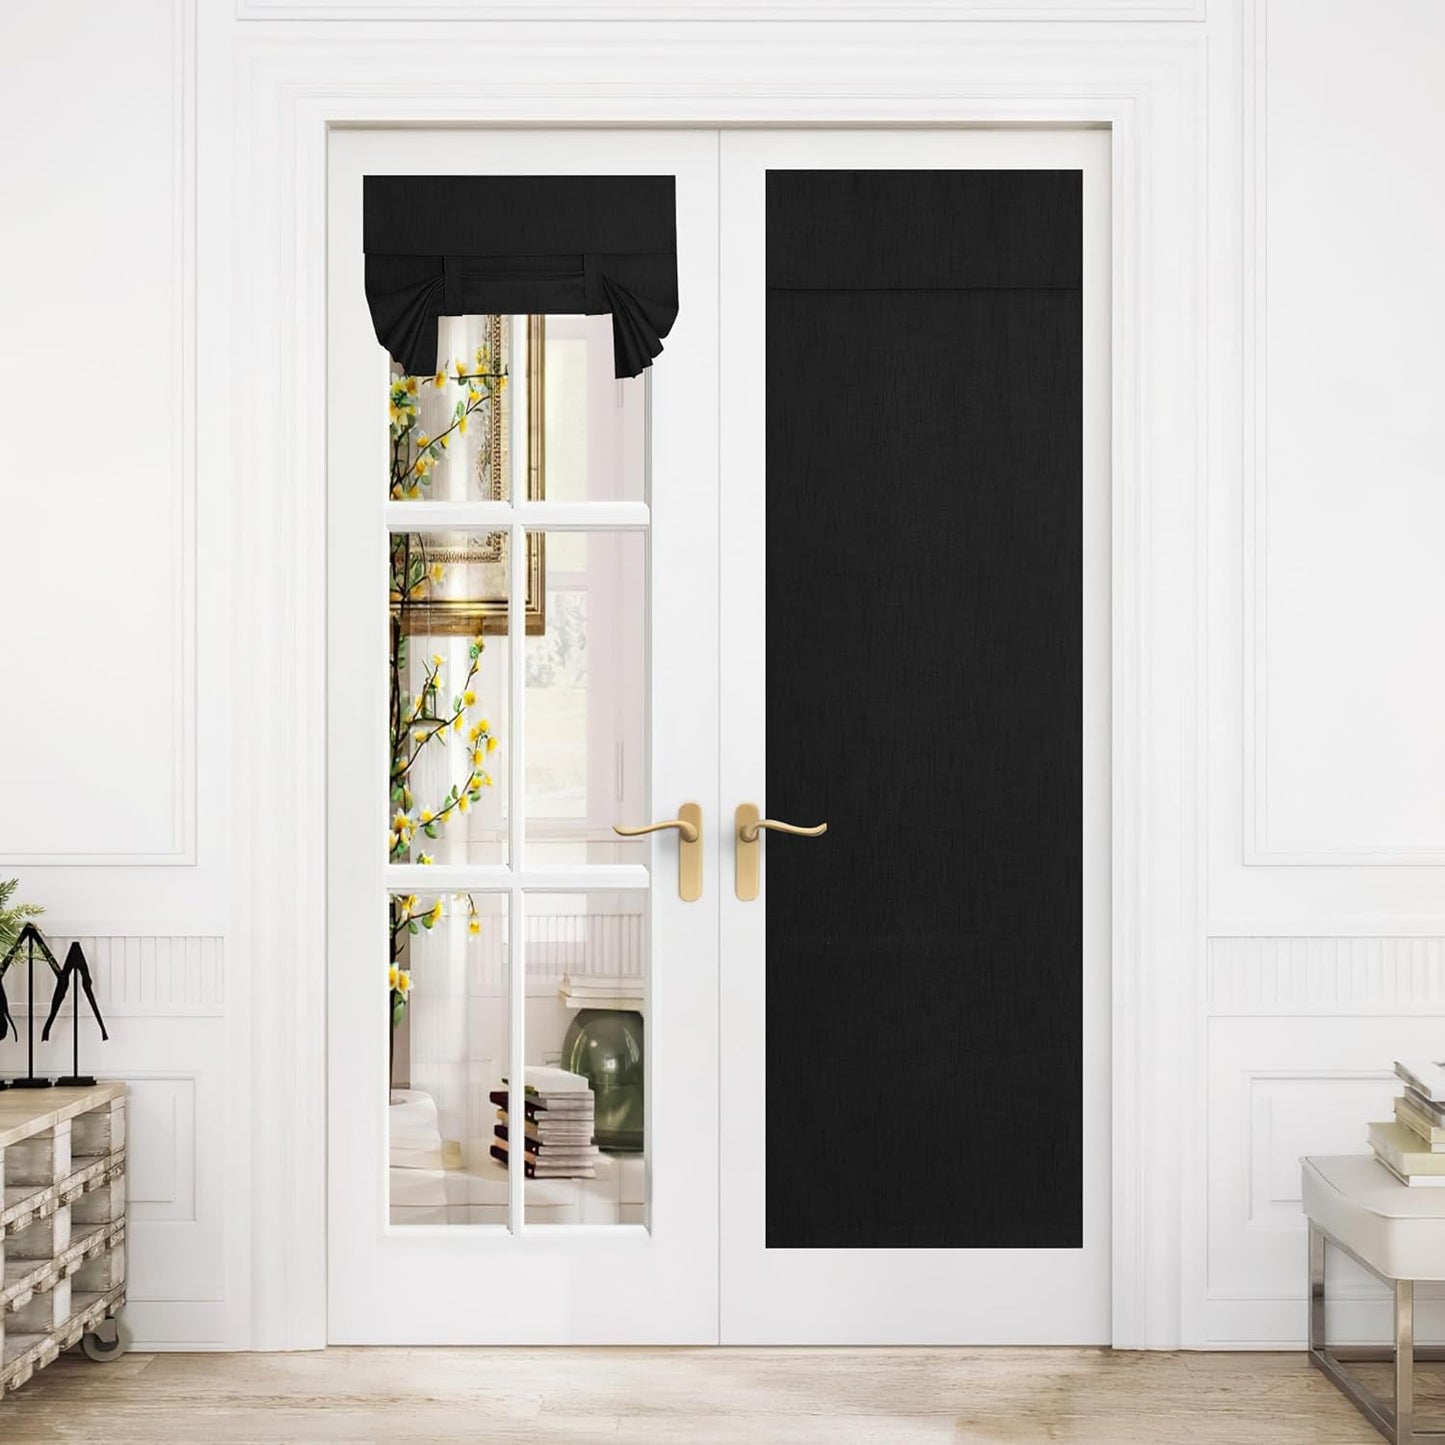 NICETOWN Linen Door Curtain for Door Window, Farmhouse French Door Curtain Shade for Kitchen Bathroom Energy Saving 100% Blackout Tie up Shade for Patio Sliding Glass, 1 Panel, Natural, 26" W X 72" L  NICETOWN Jet Black W26 X L72 